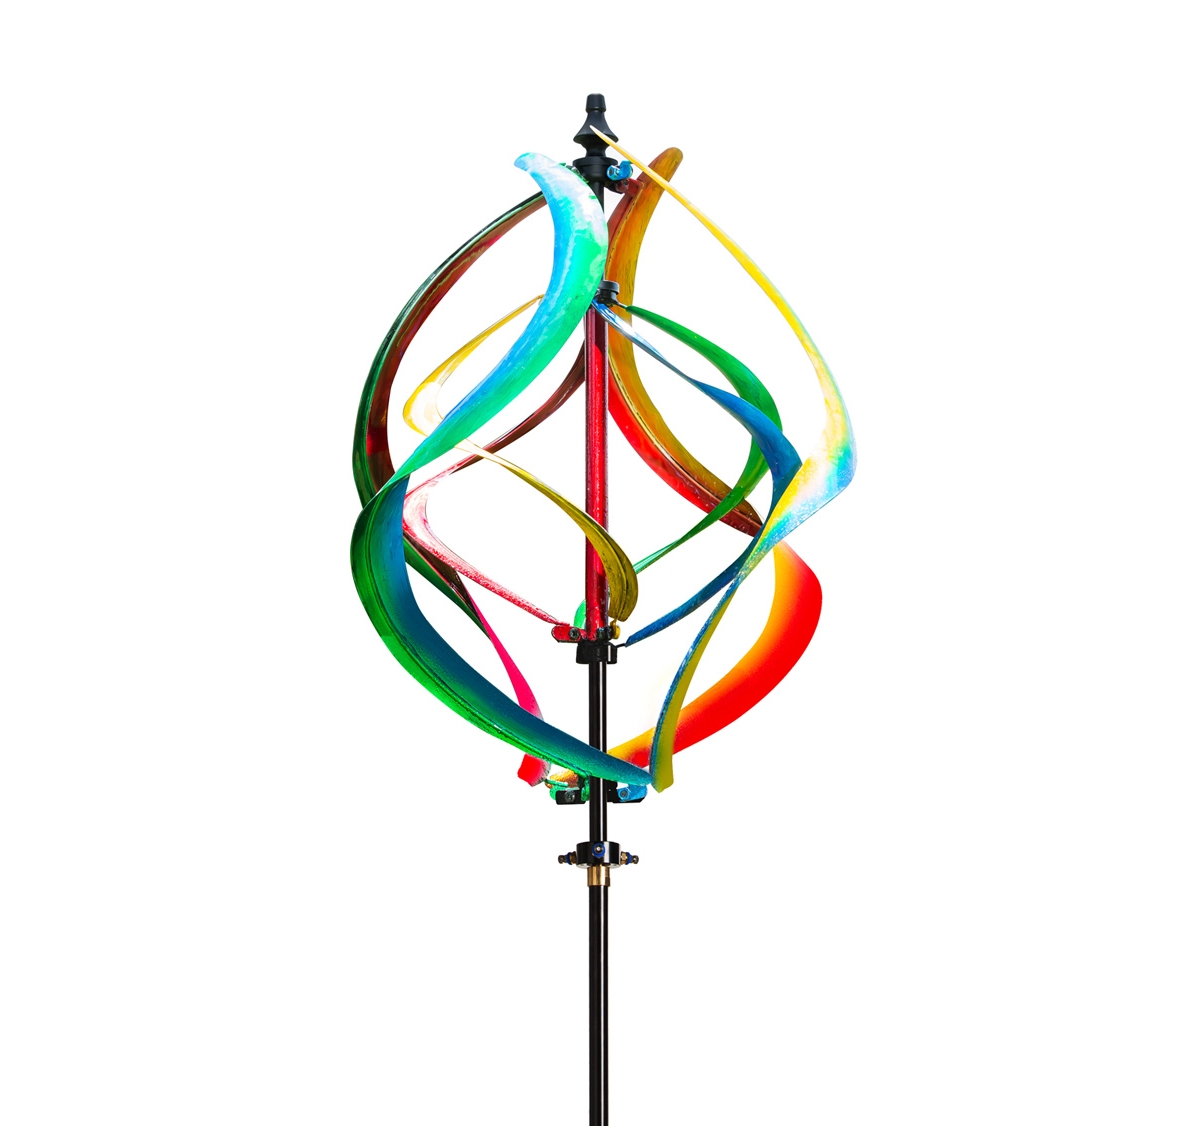 Evergreen 89"h Misting Wind Spinner, Multicolor Helix- Fade And Weather Resistant Outdoor Decor For Homes, Yar In Multicolored